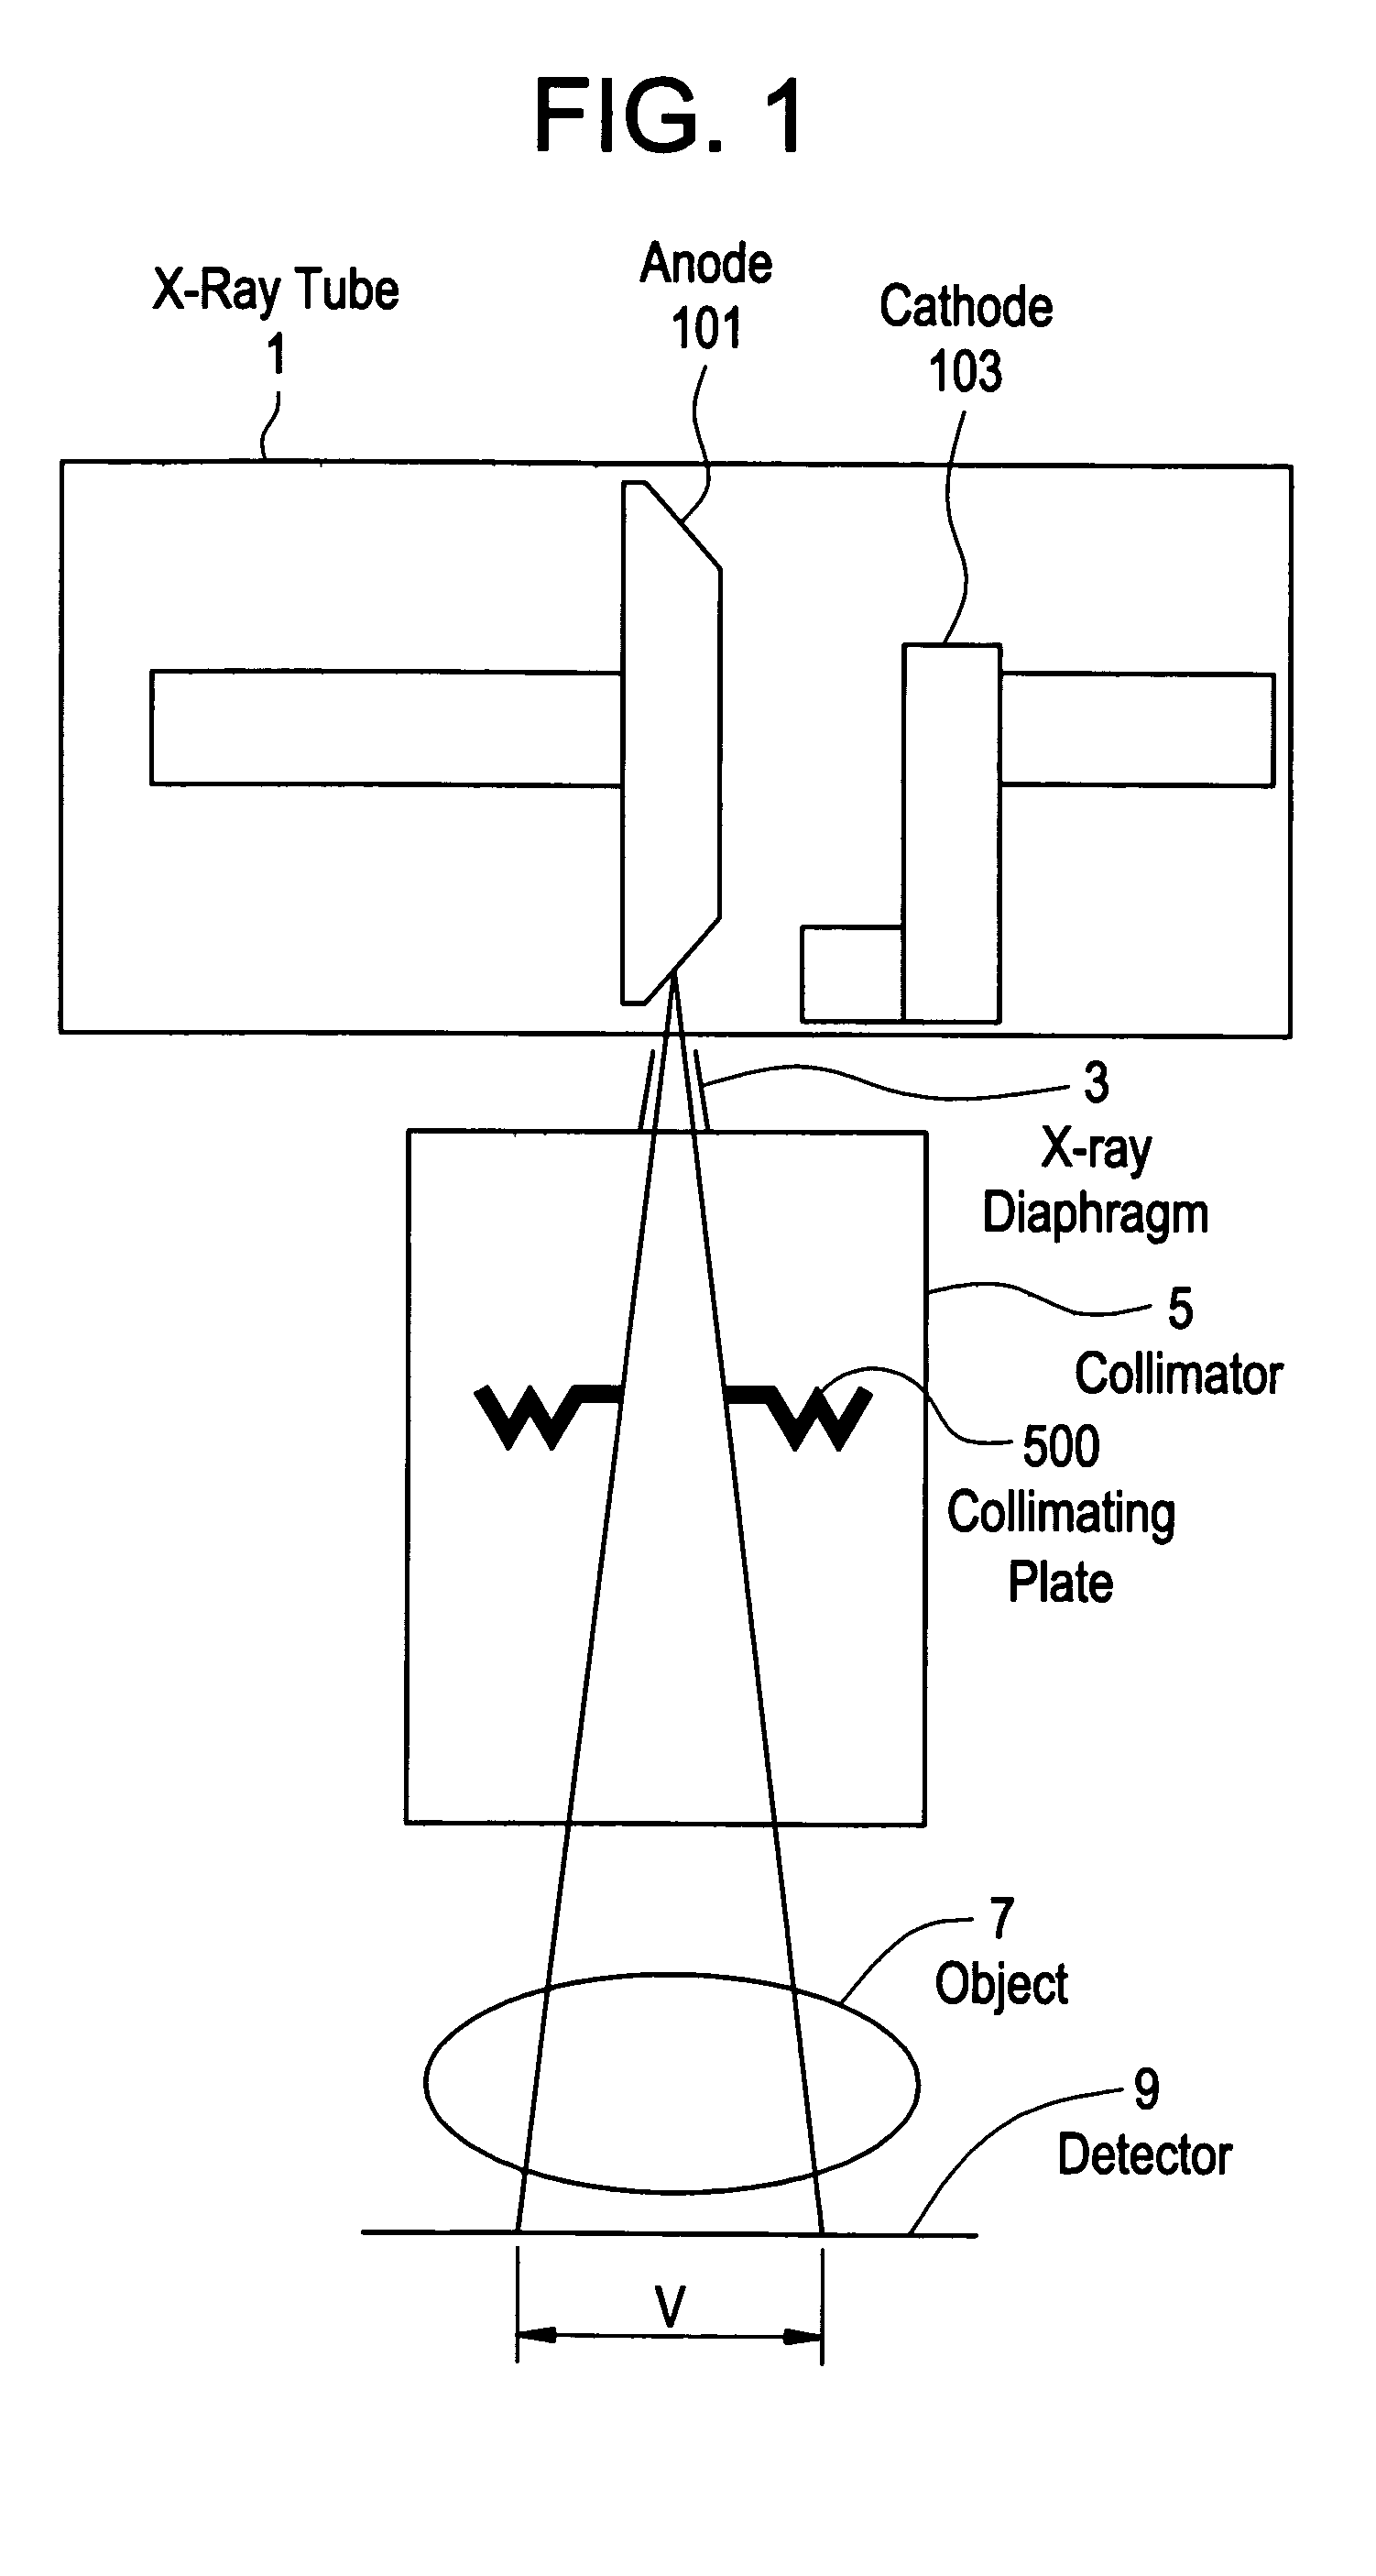 Collimator, X-ray irradiator, and X-ray apparatus